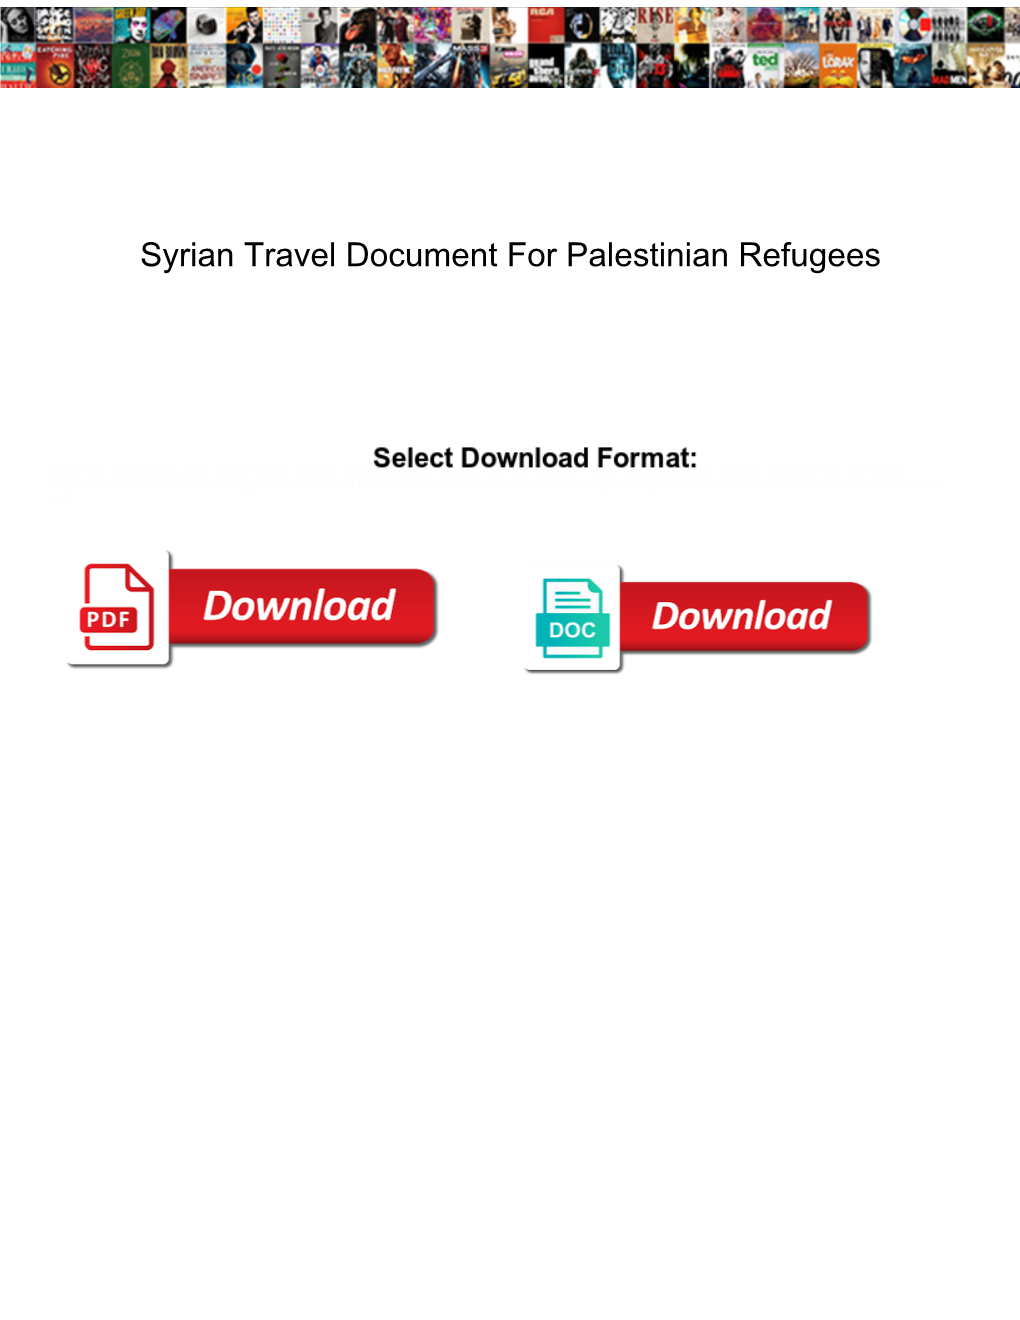 Syrian Travel Document for Palestinian Refugees